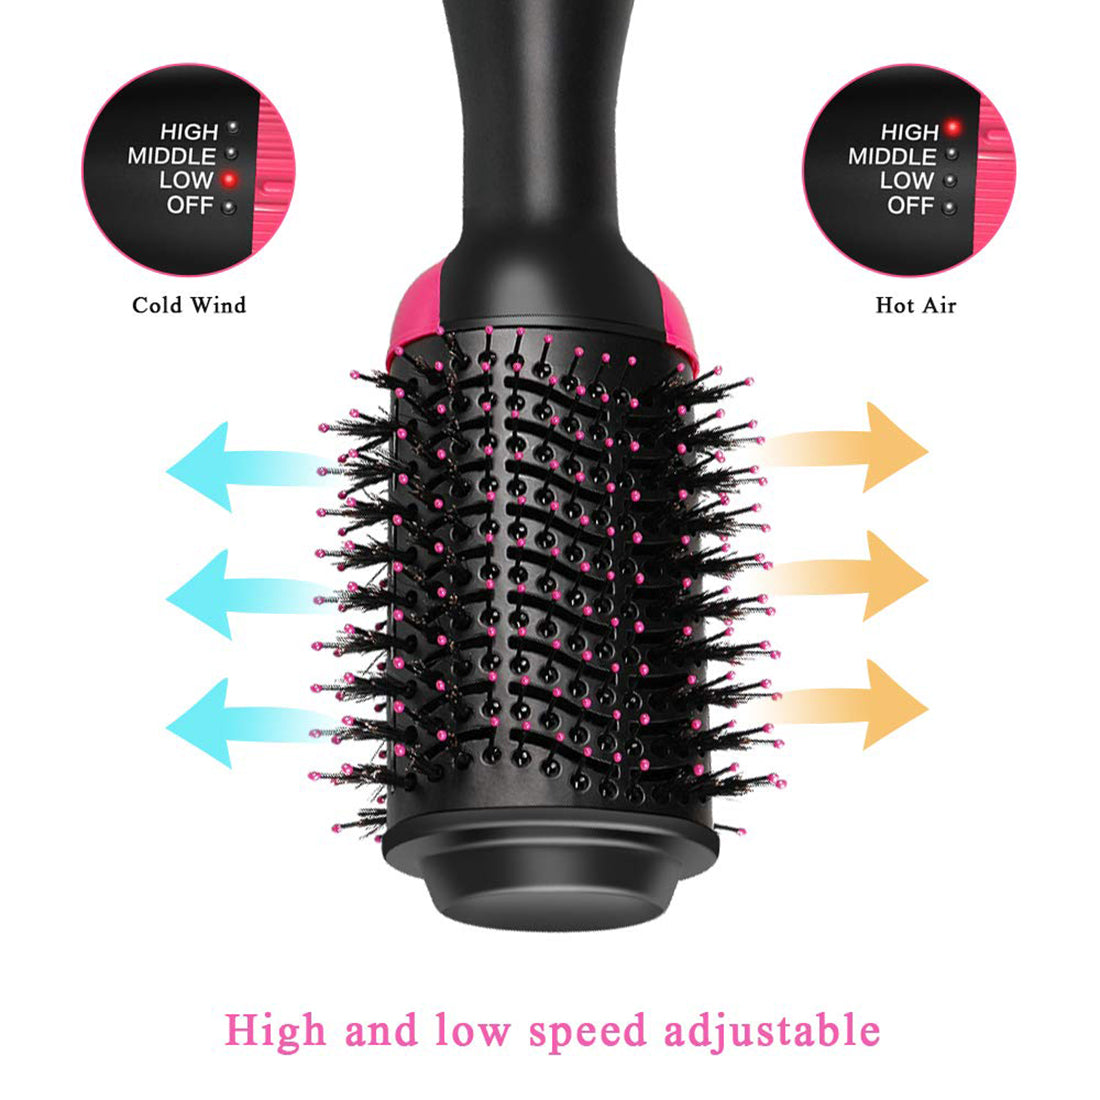 2 in 1 Multifunctional Hair Dryer & Volumizer Hair Brush Roller Rotate Comb Styling Straightening Curling Iron